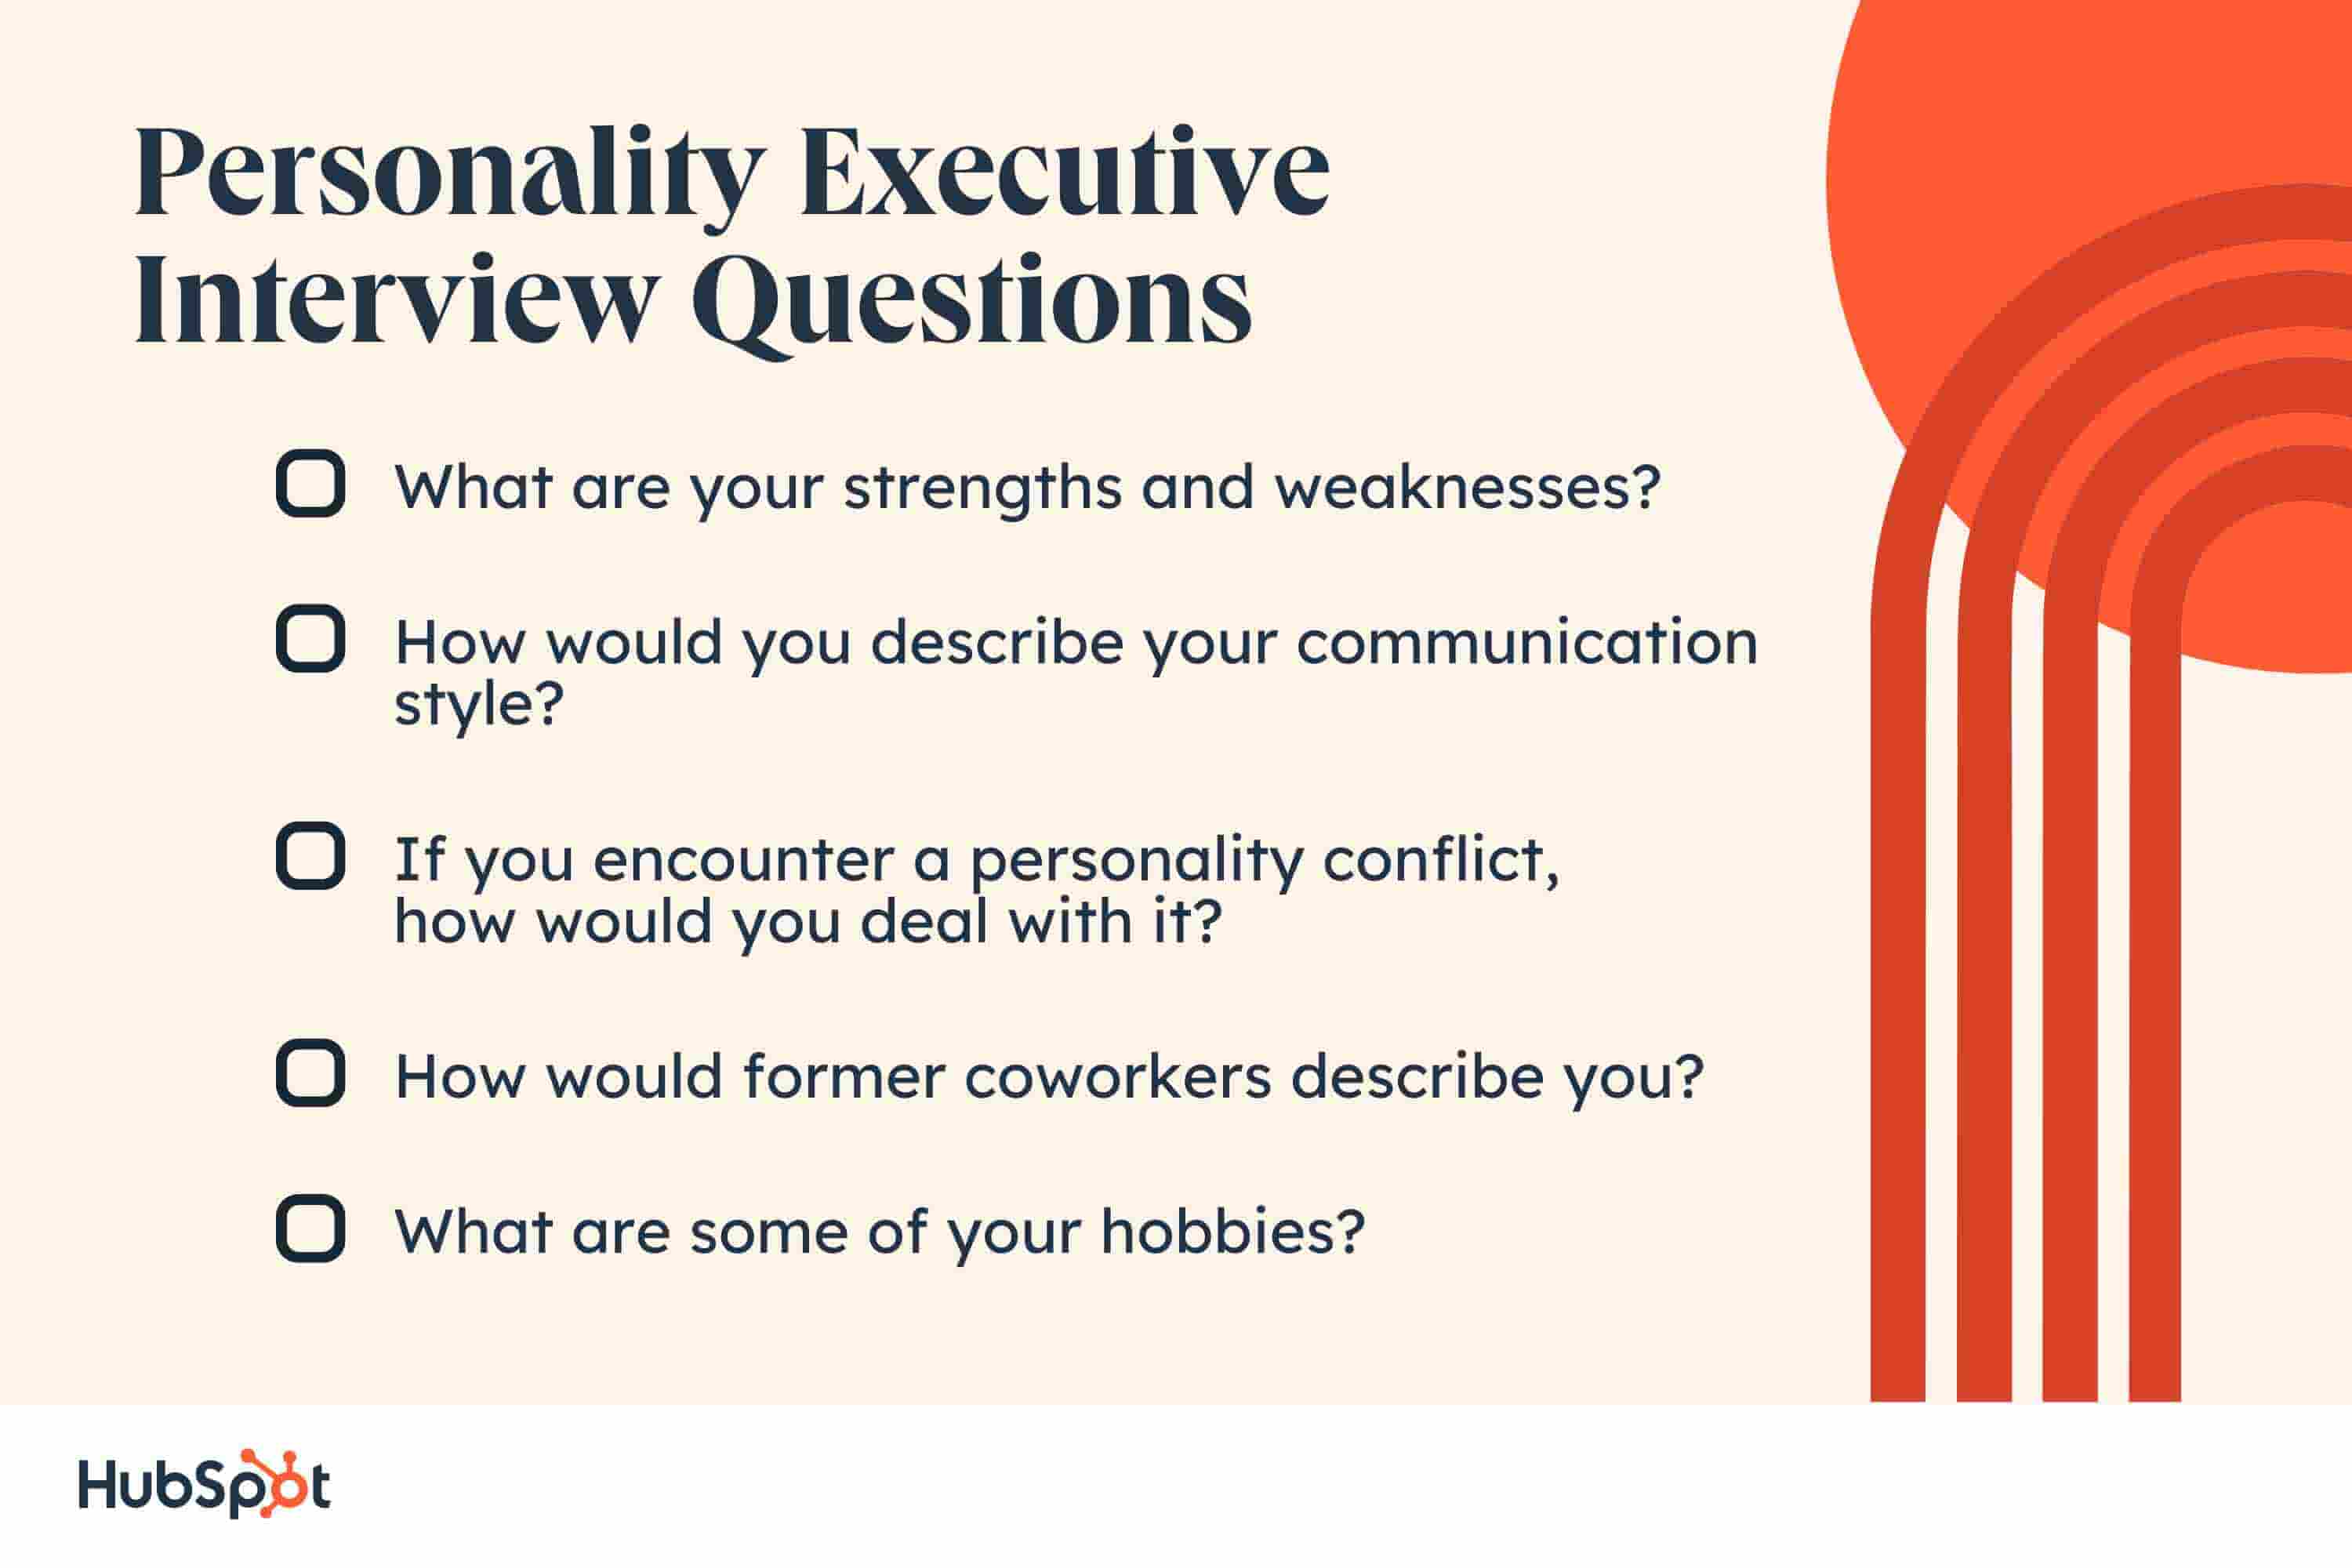 executive interview questions. What are your strengths and weaknesses? How would you describe your communication style? If you encounter a personality conflict, how would you deal with it? How would former coworkers describe you? What are some of your hobbies?